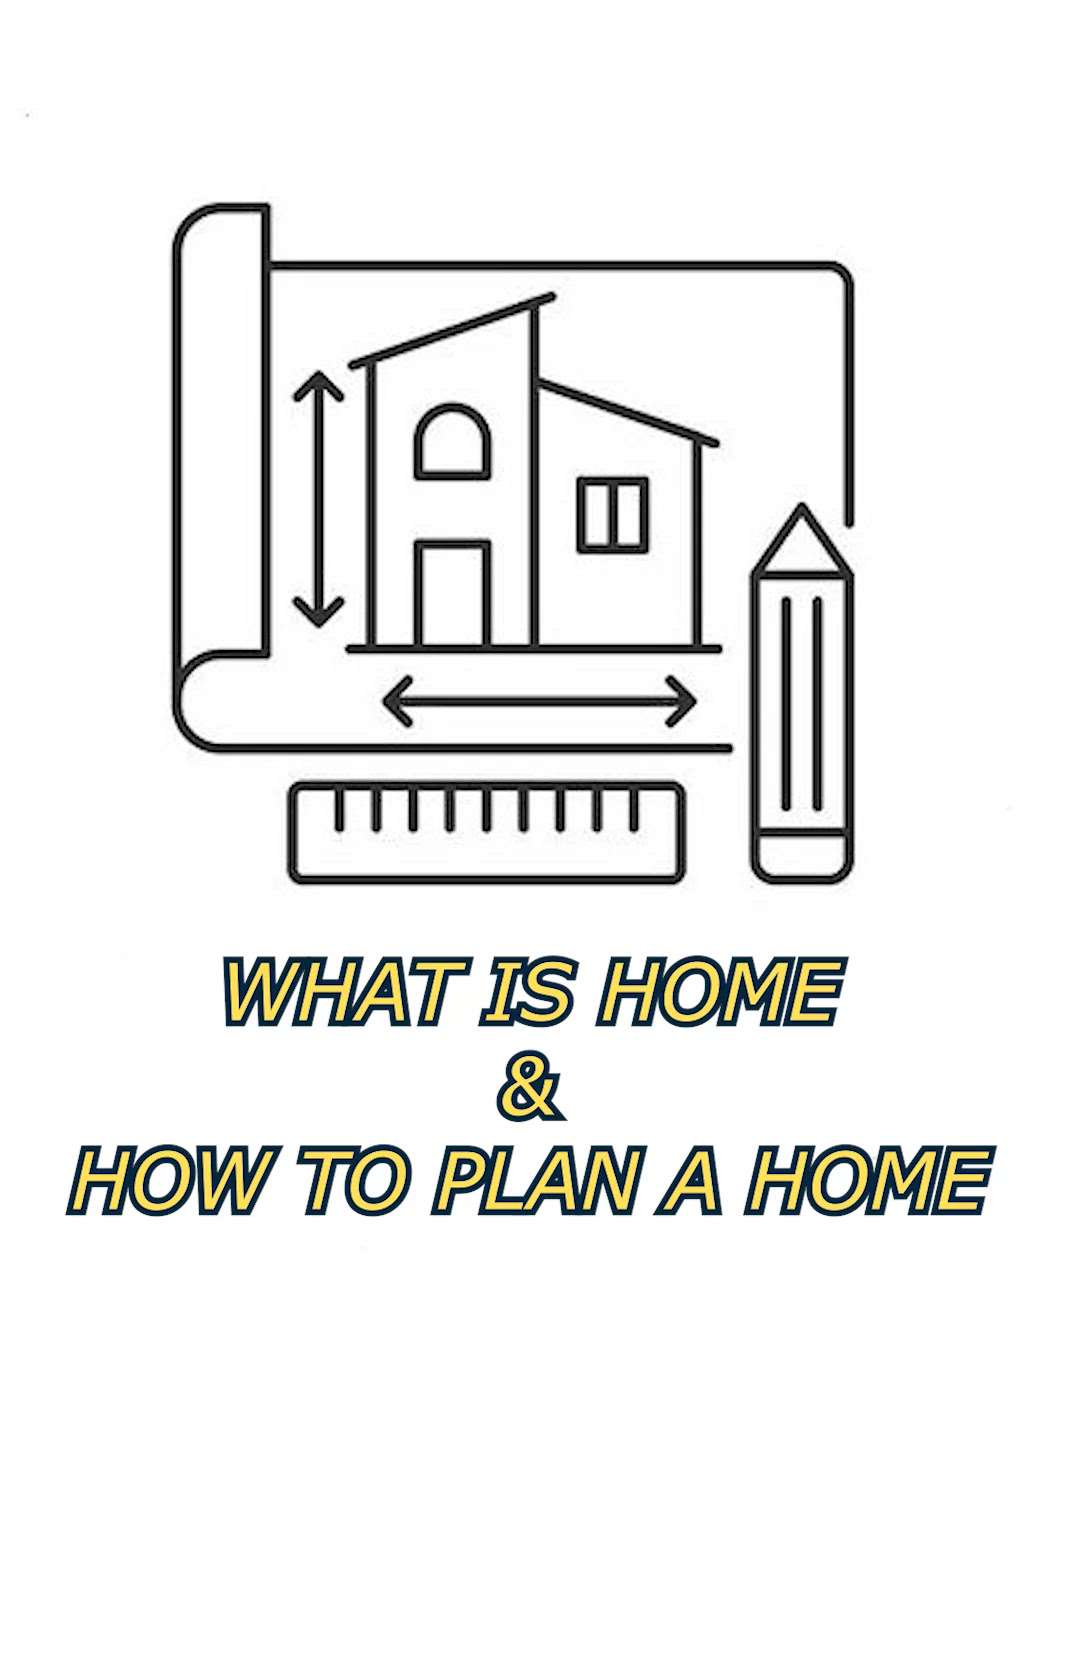 please watch this video before planning your home.

#creatorsofkolo #home #whatshome #വീട് #stories 
#homeplanning #tips&tricks #plan #home #kochi #Eranakulam #homeideas #Location #homelocation #budgeting #homerequirments #kerala #malayalam